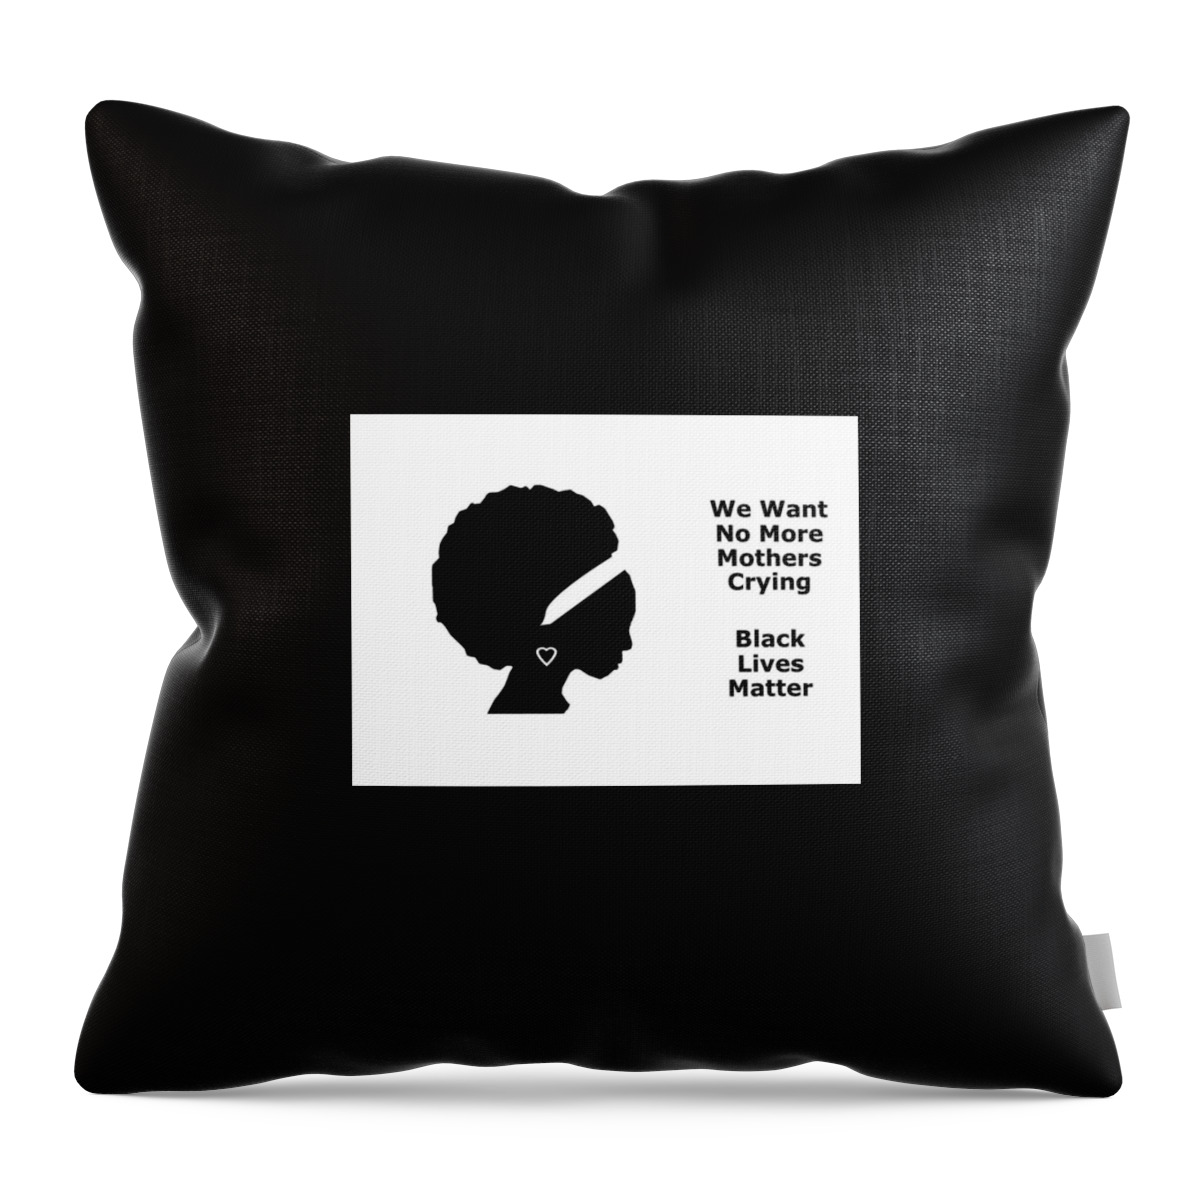 Blm Throw Pillow featuring the mixed media No More Mothers Crying by Nancy Ayanna Wyatt